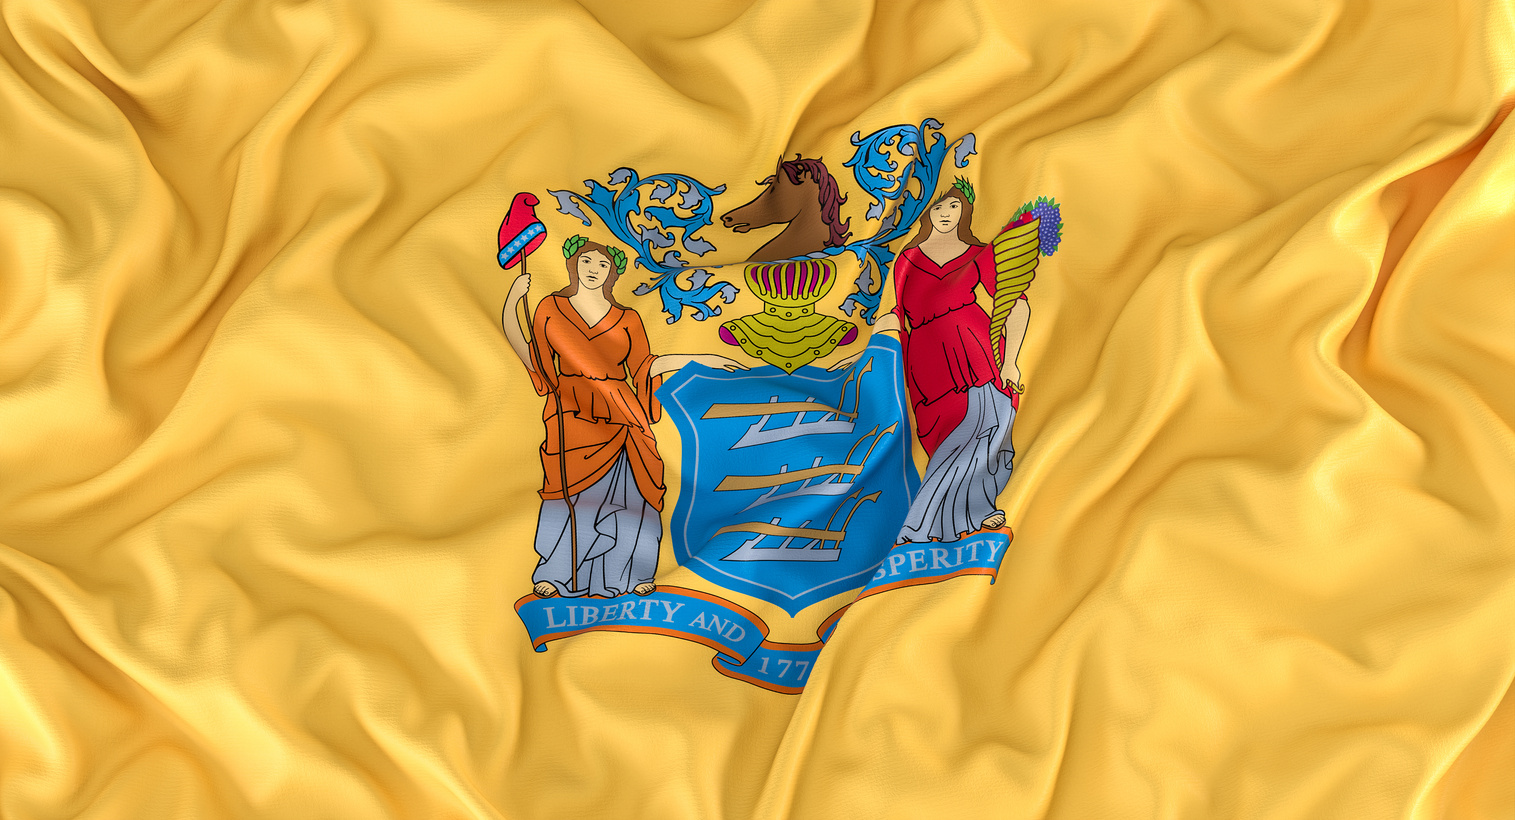 State Flag of New Jersey.